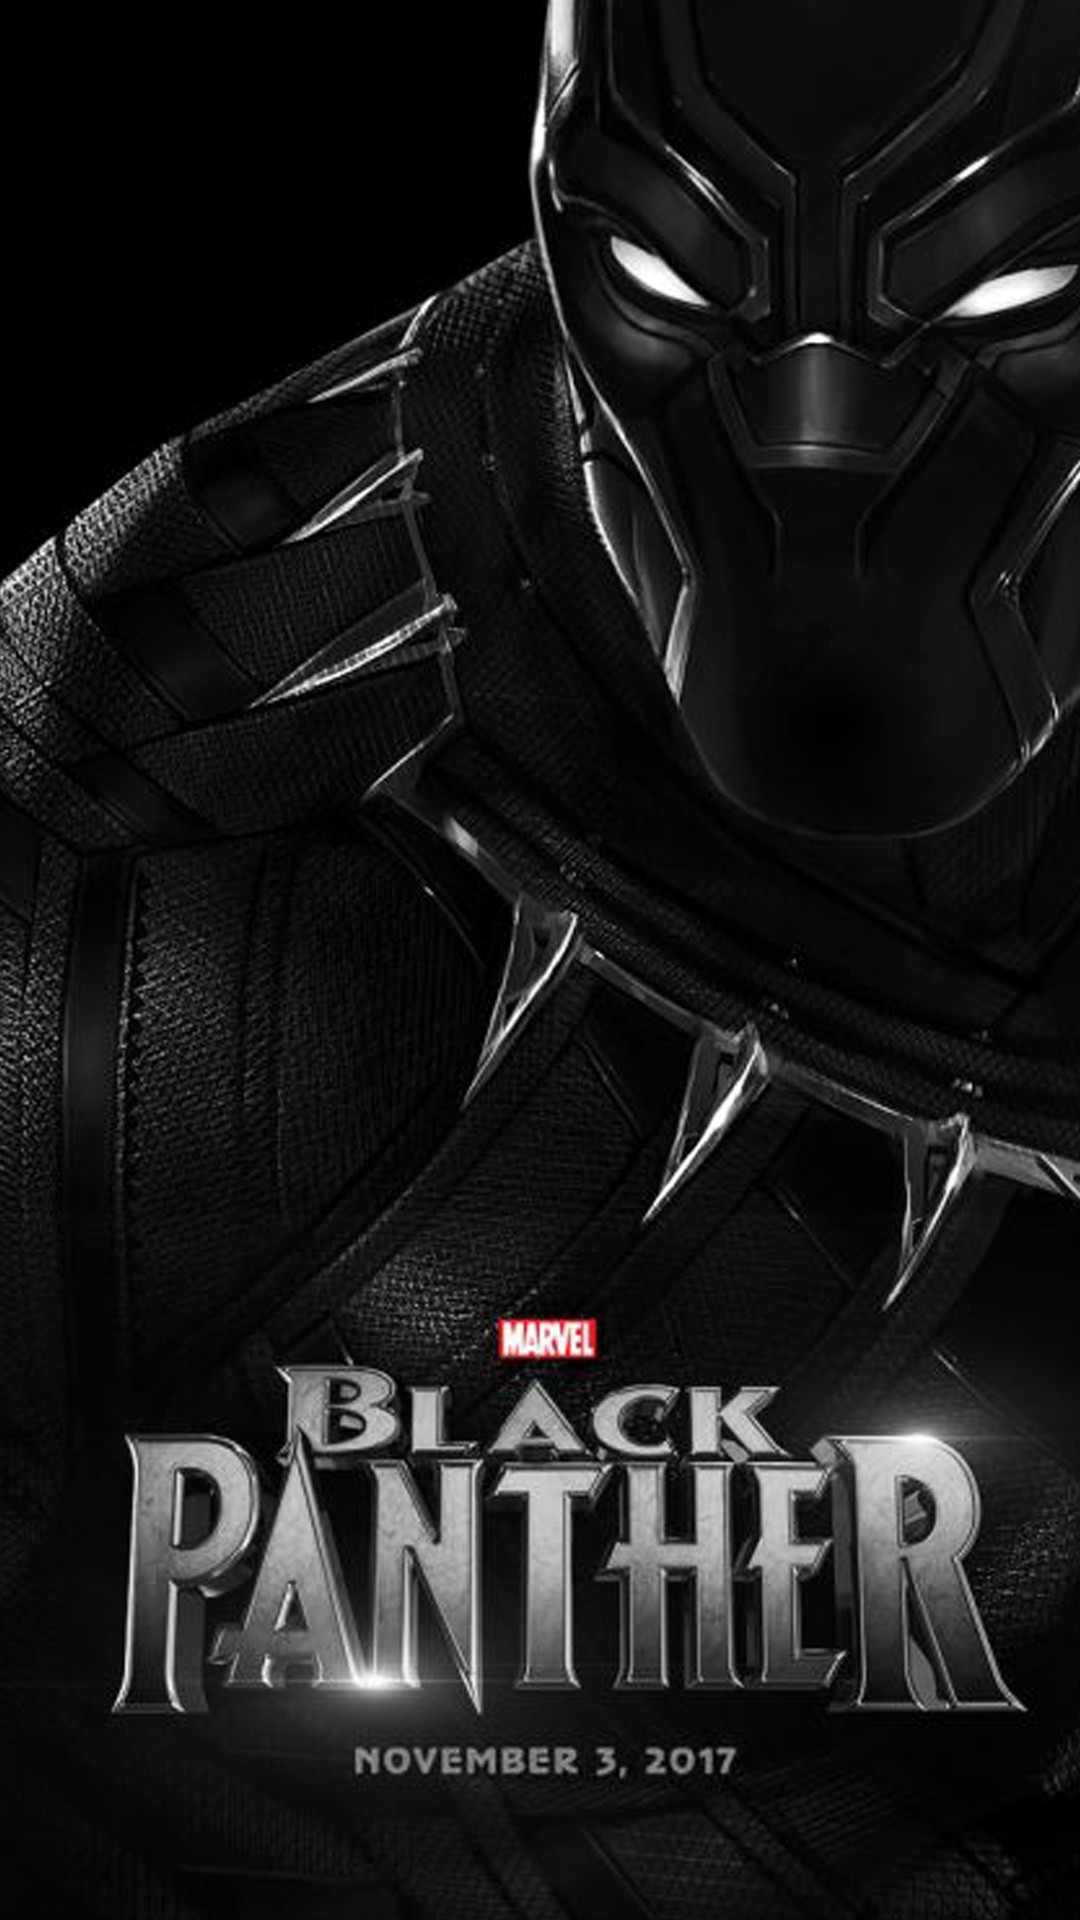 panther iphone wallpaper,poster,fictional character,movie,helmet,action film